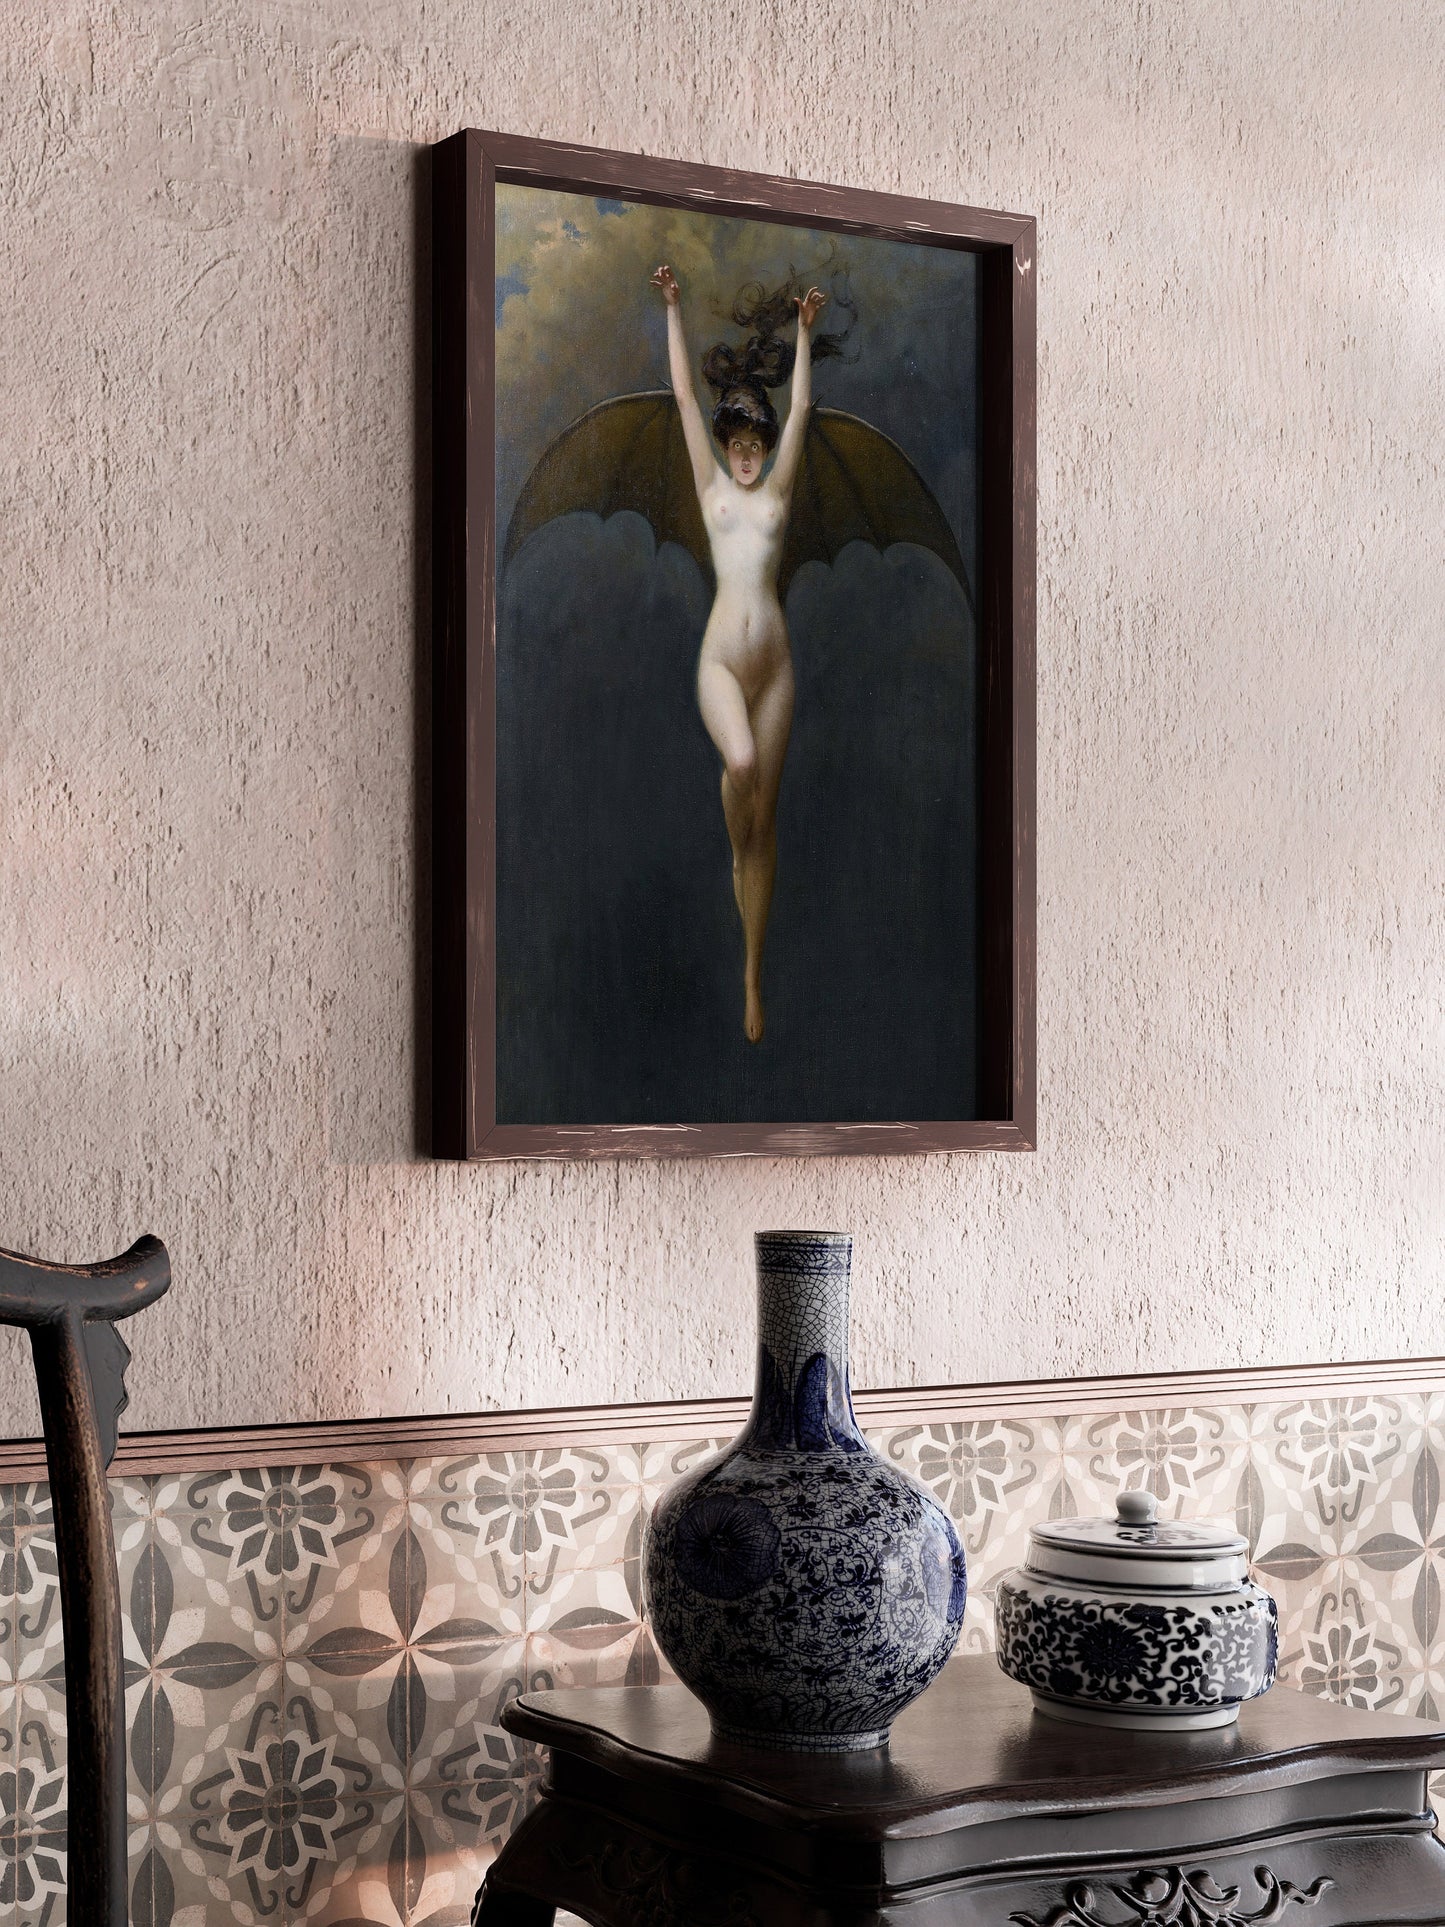 The Bat Woman Pénot Dark Gothic Surreal Art Famous Mexican Iconic Painting Vintage Ready to hang Framed Home Office Decor Print Gift Idea